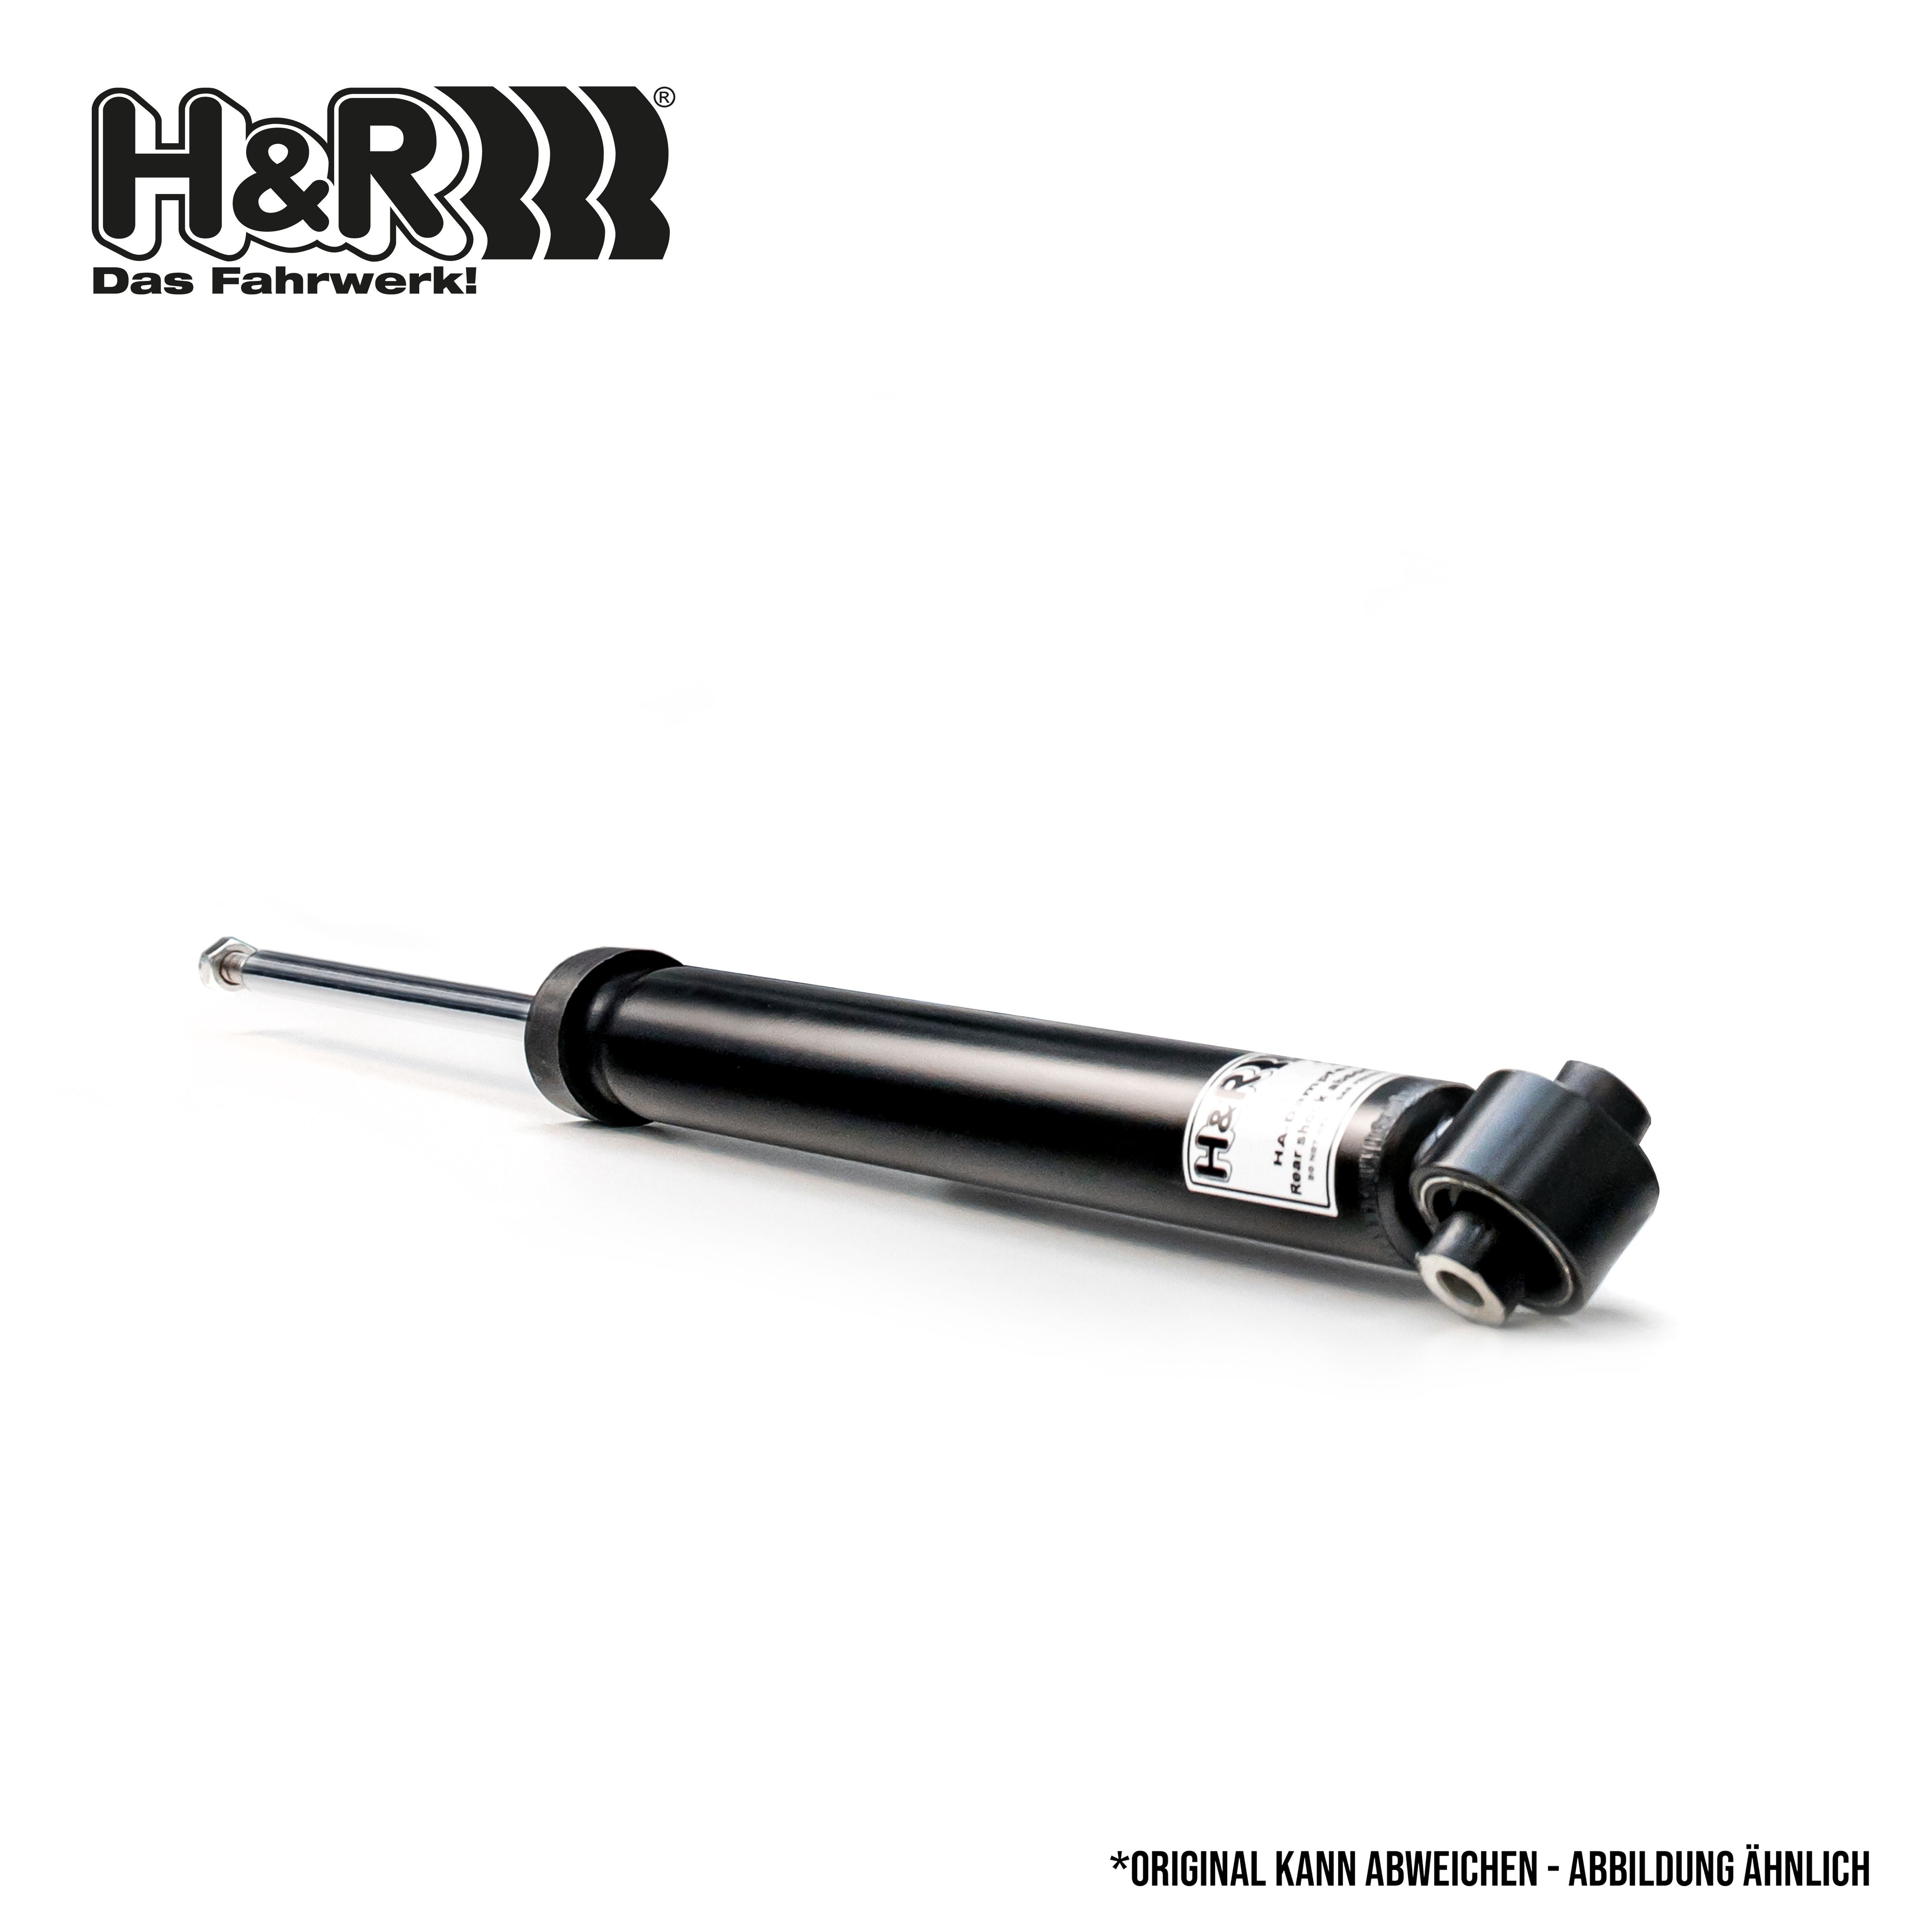 H&R Dust Cover for Coilover (4607.452)